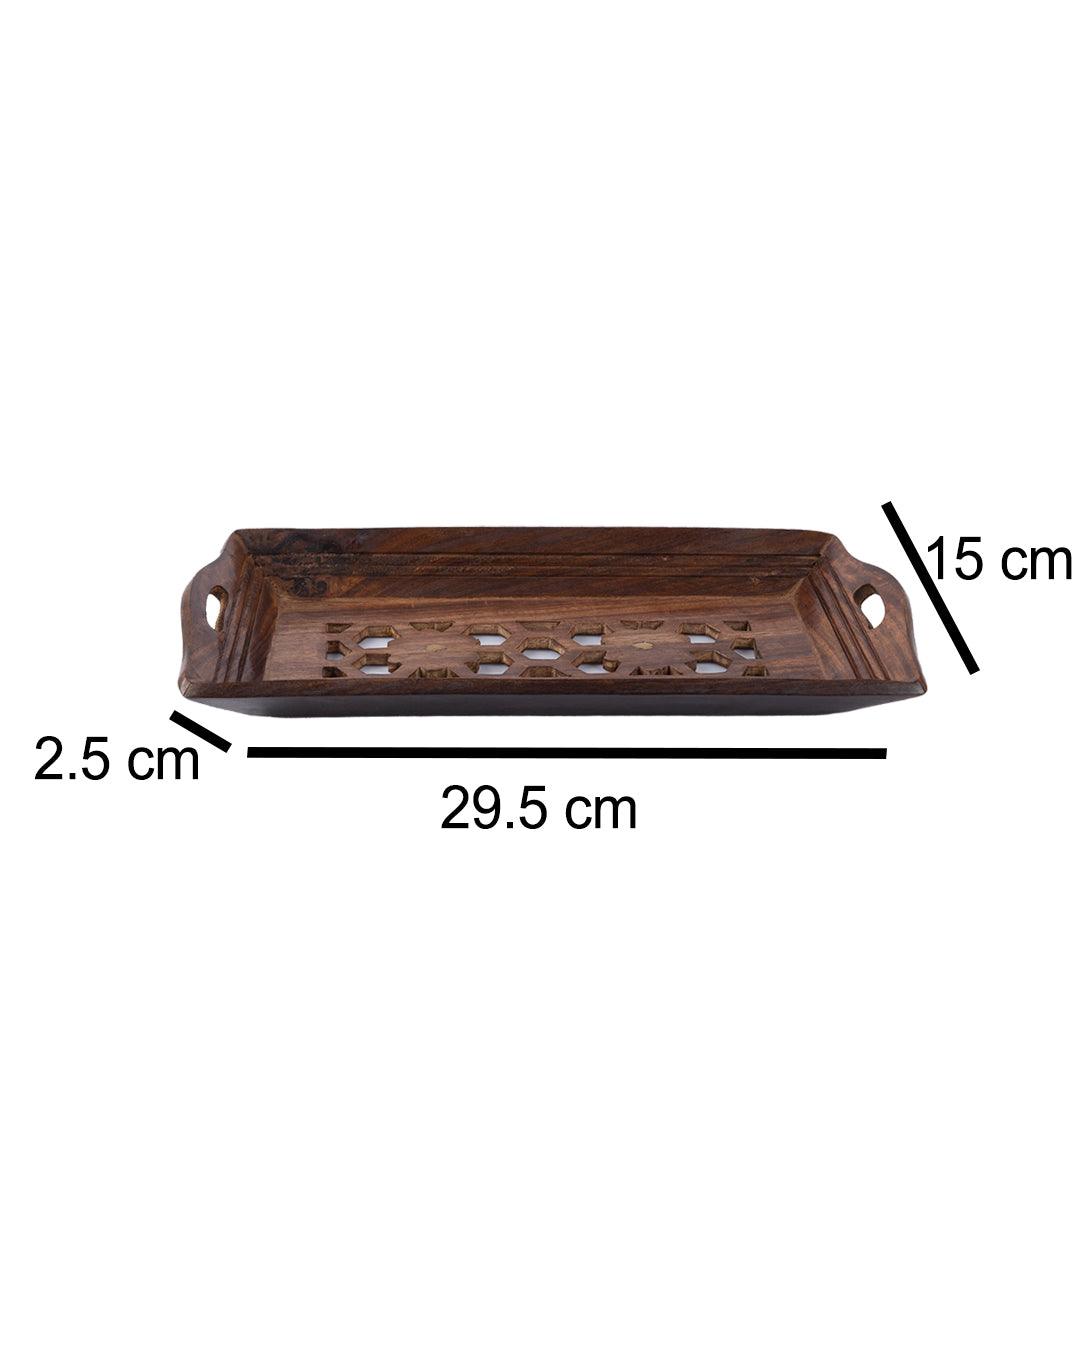 'WOOD CARVING' Handcrafts Coffee Serving Tray with Handles in Sheesham Wood - MARKET 99